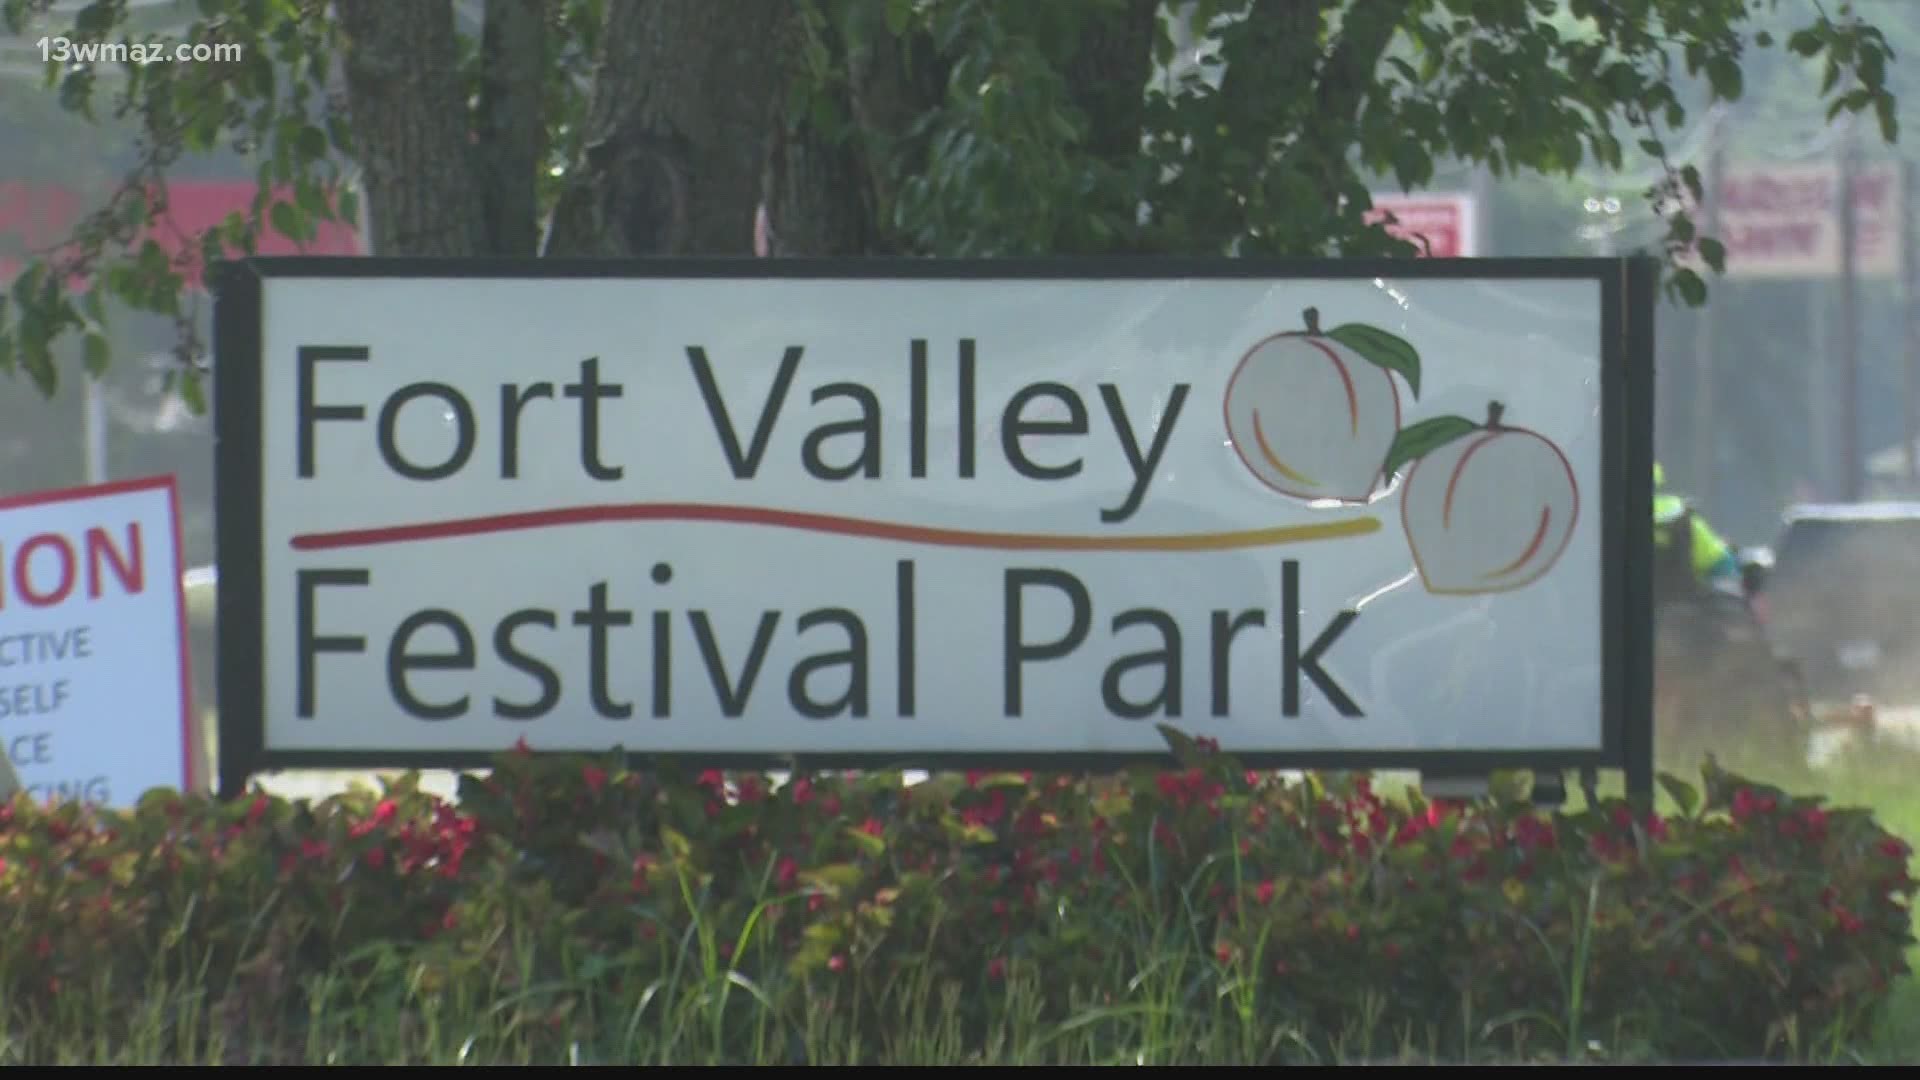 On Friday, the City of Fort Valley and the USDA will host a food drive at Festival Park where they plan to give more than 400 boxes of produce to families.